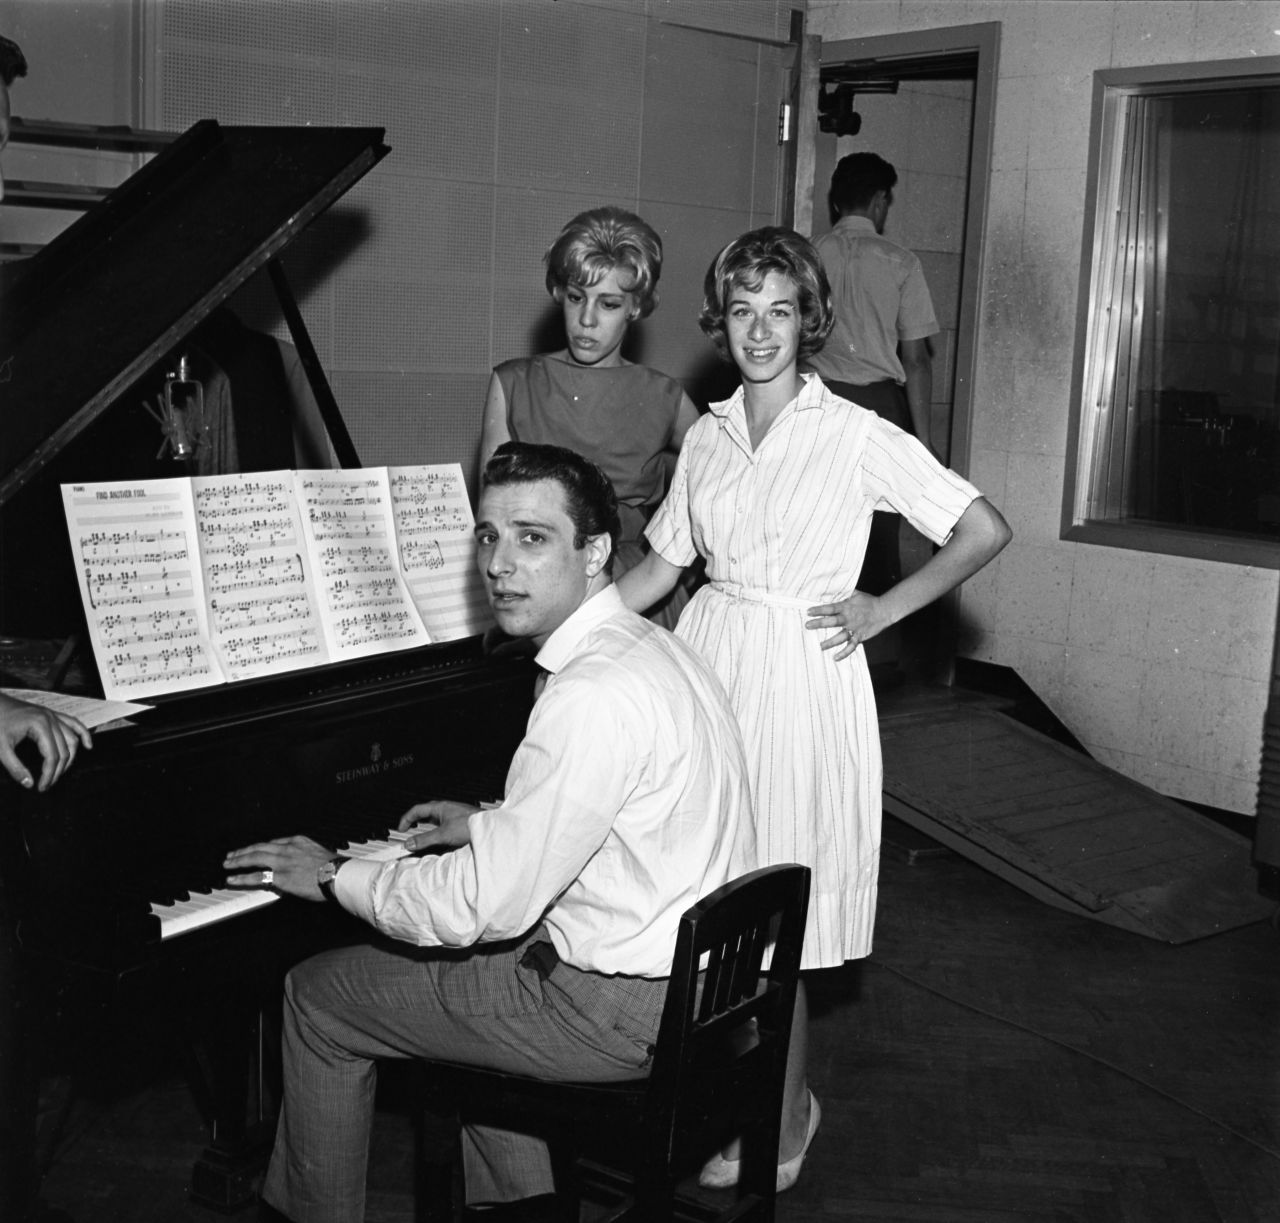 Musicians<a href="http://www.mann-weil.com/" target="_blank" target="_blank"> Barry Mann, Cynthia Weil</a> and King at JDS Records in 1959. Mann and Weil were a husband and wife songwriting team. They were part of the teen writing staff at Aldon Music, which included King and Goffin. Mann and Weil produced "Uptown," "Here You Come Again," and "You've Lost That Lovin' Feeling."